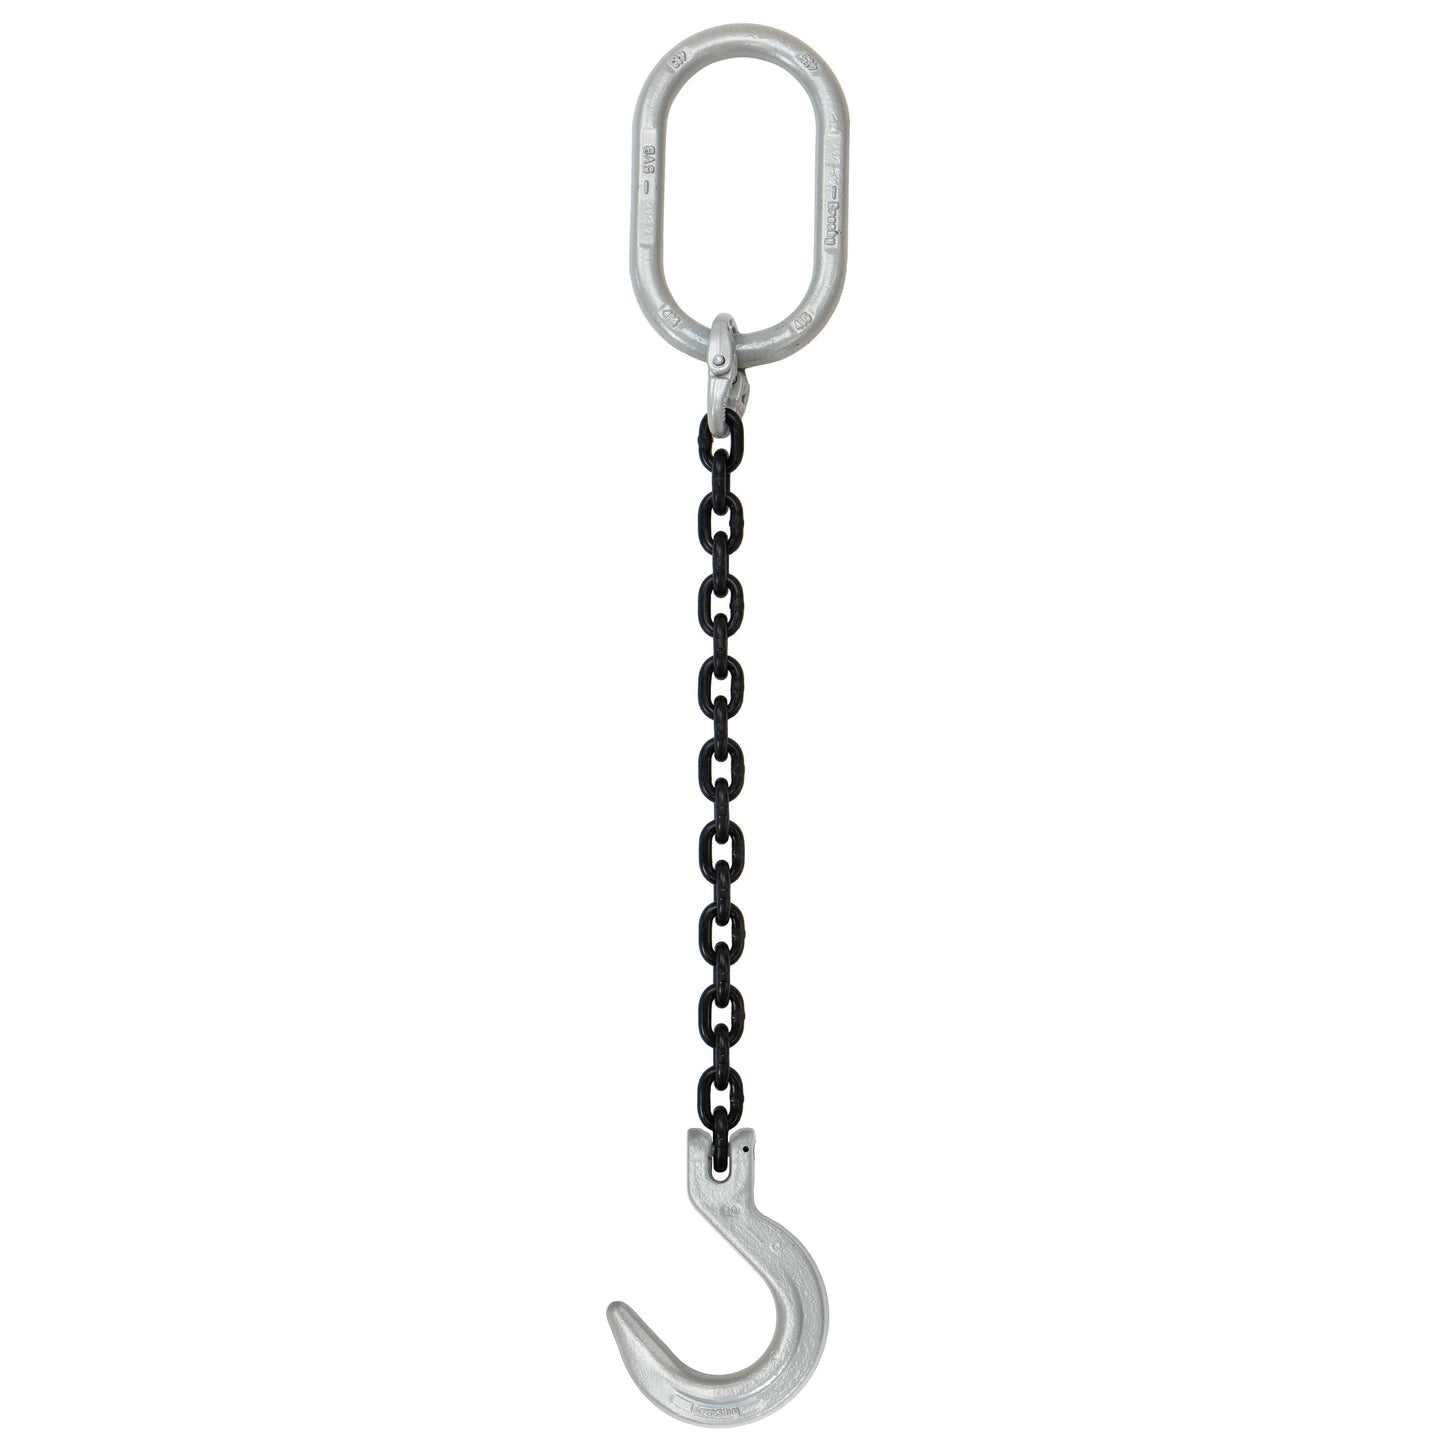 38 inch x 12 foot Domestic Single Leg Chain Sling w Crosby Foundry Hook Grade 100 image 1 of 2